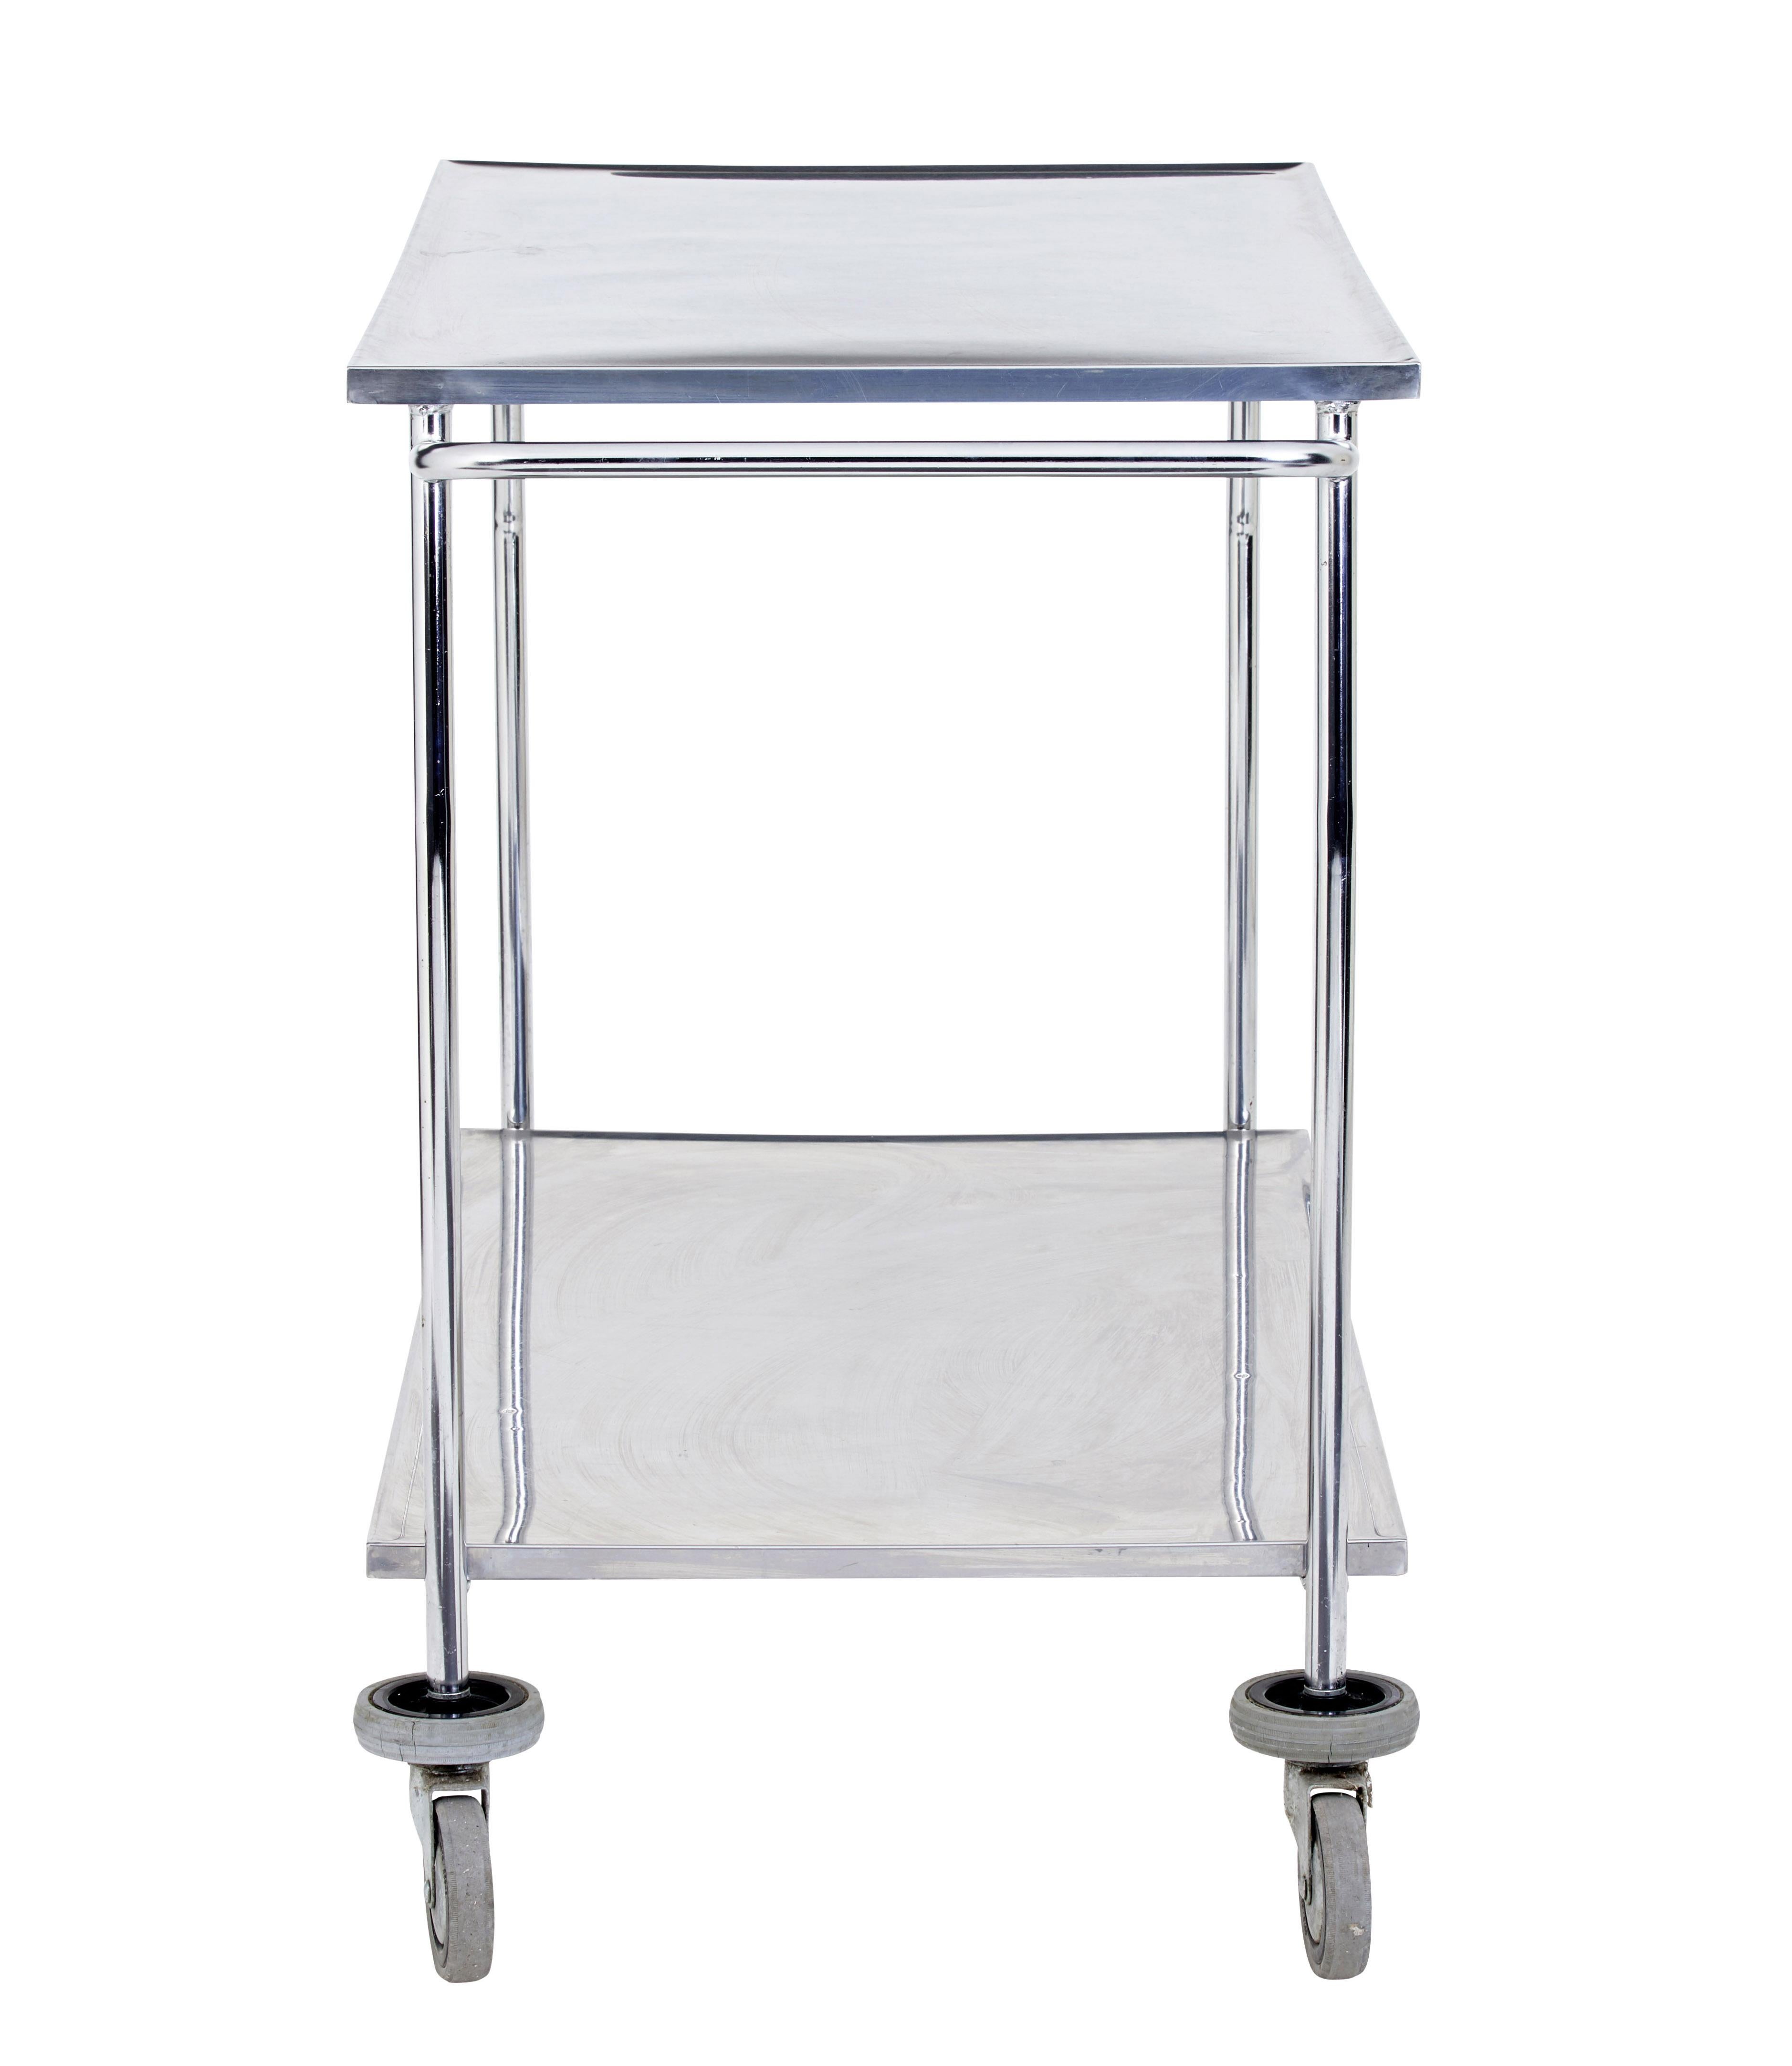 1970’s stainless steel medical trolley

Made by 'solema' this swedish made trolly offers many possible everyday uses.

2 tier with handles each end, fitted with easy glide wheels and rubber buffers.

Expected minor surface marks and dings.